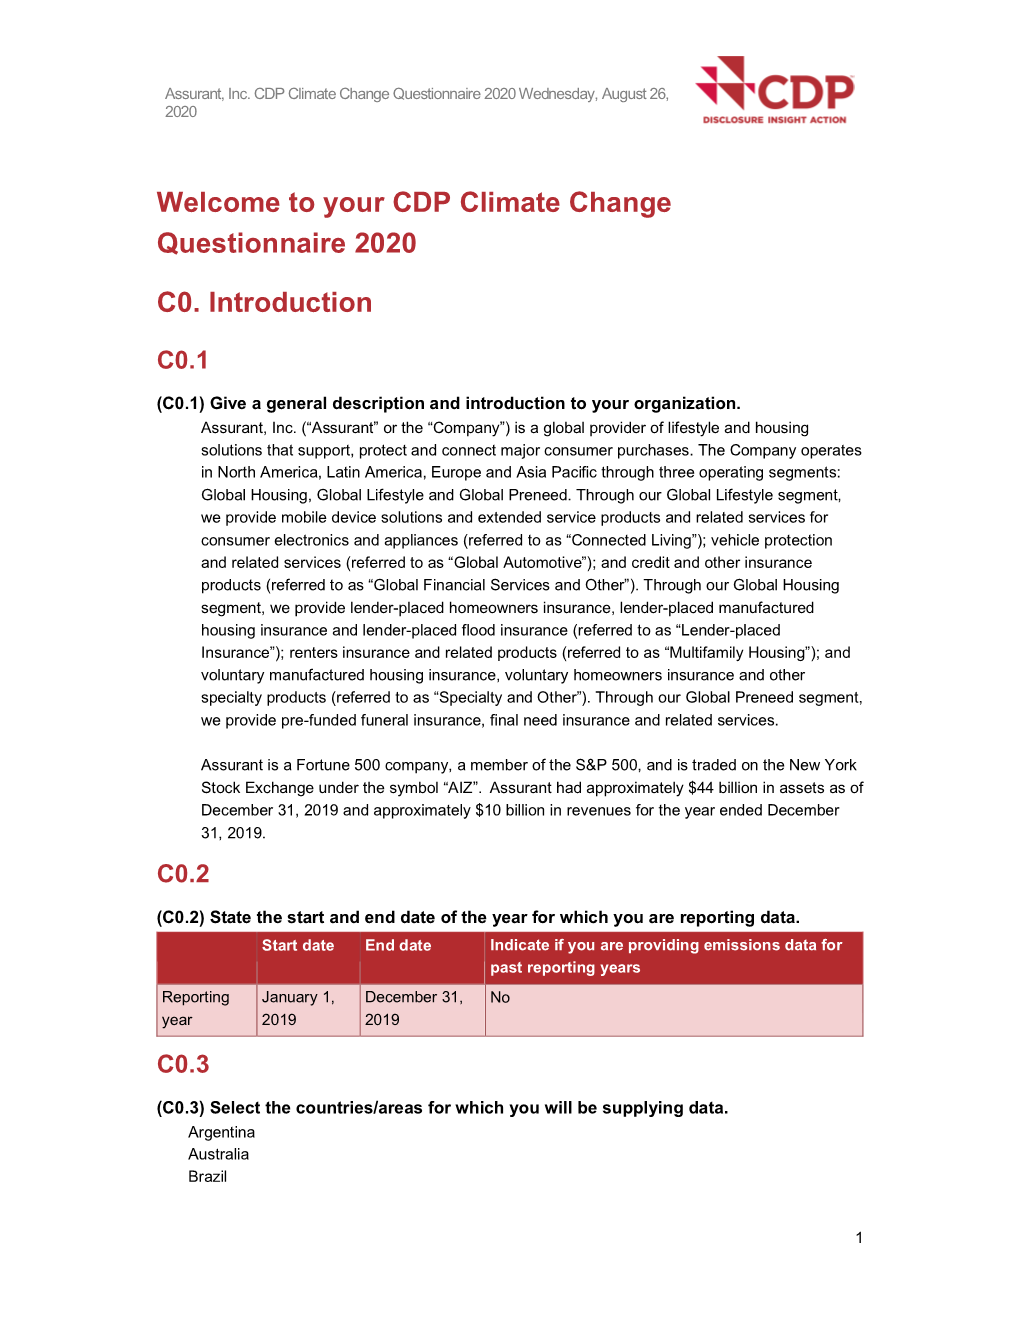 Welcome to Your CDP Climate Change Questionnaire 2020 C0. Introduction